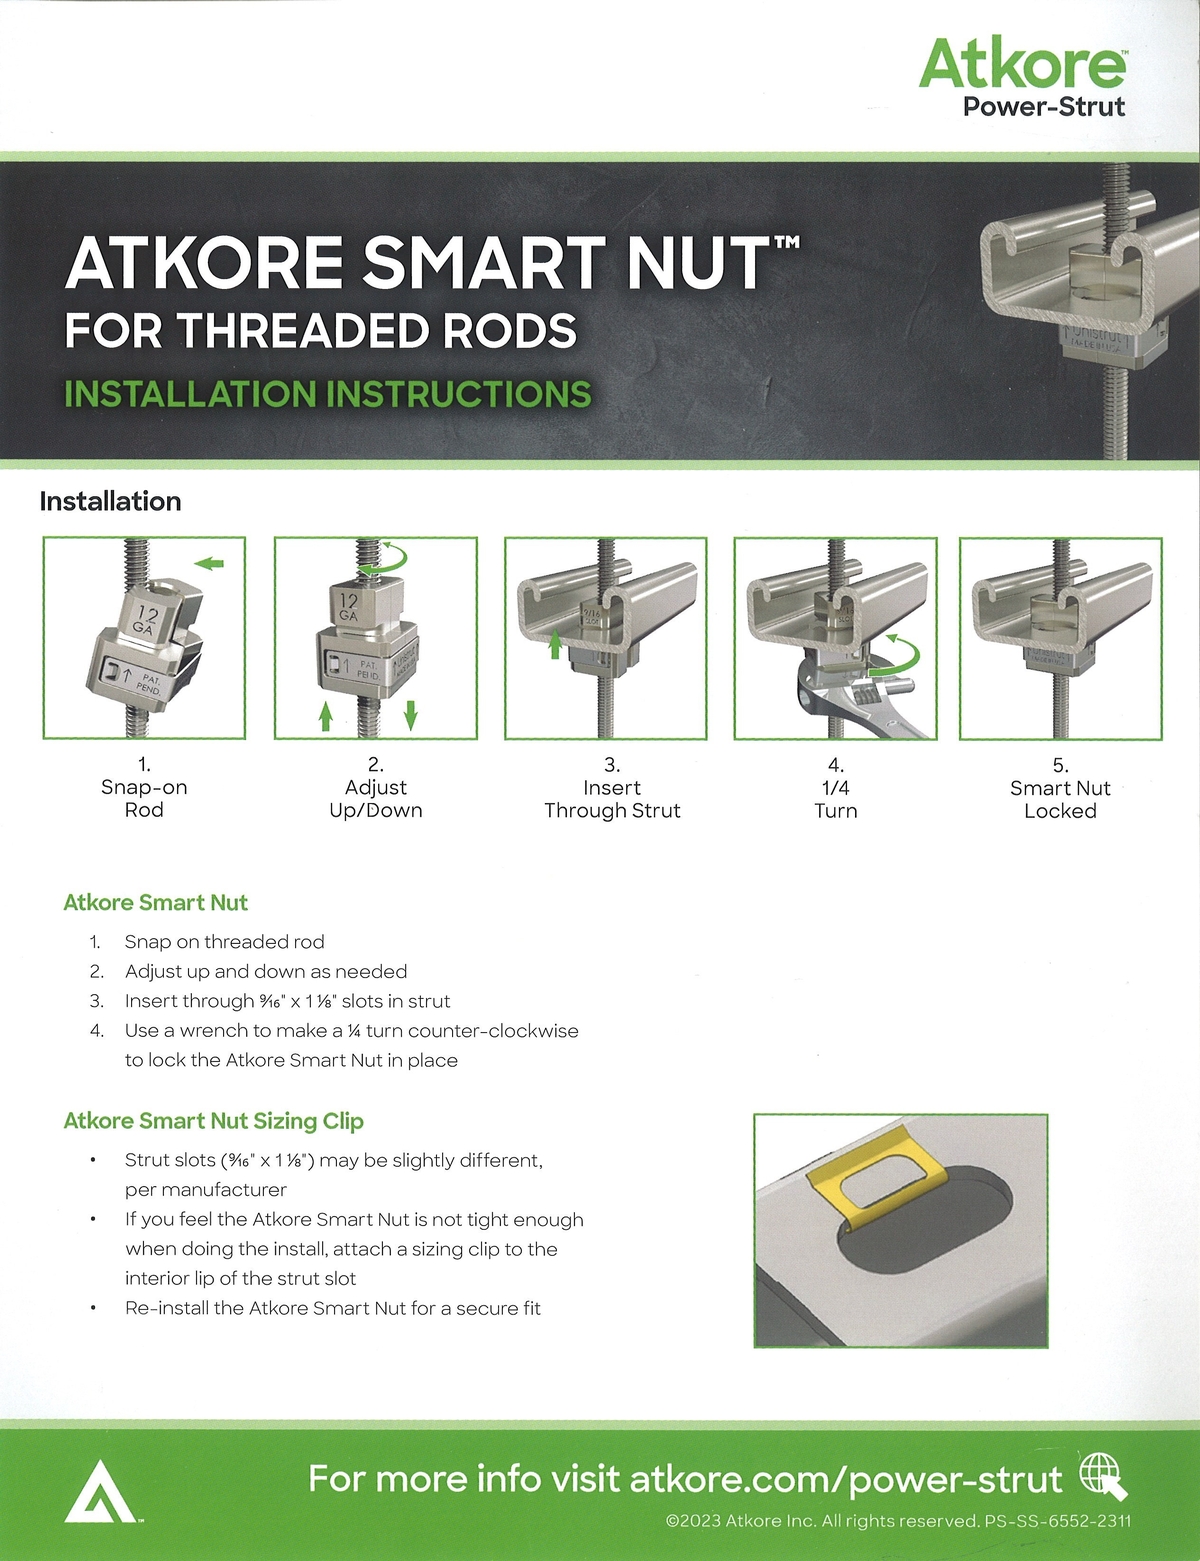 All New Atkore Smart Nut Featured Image